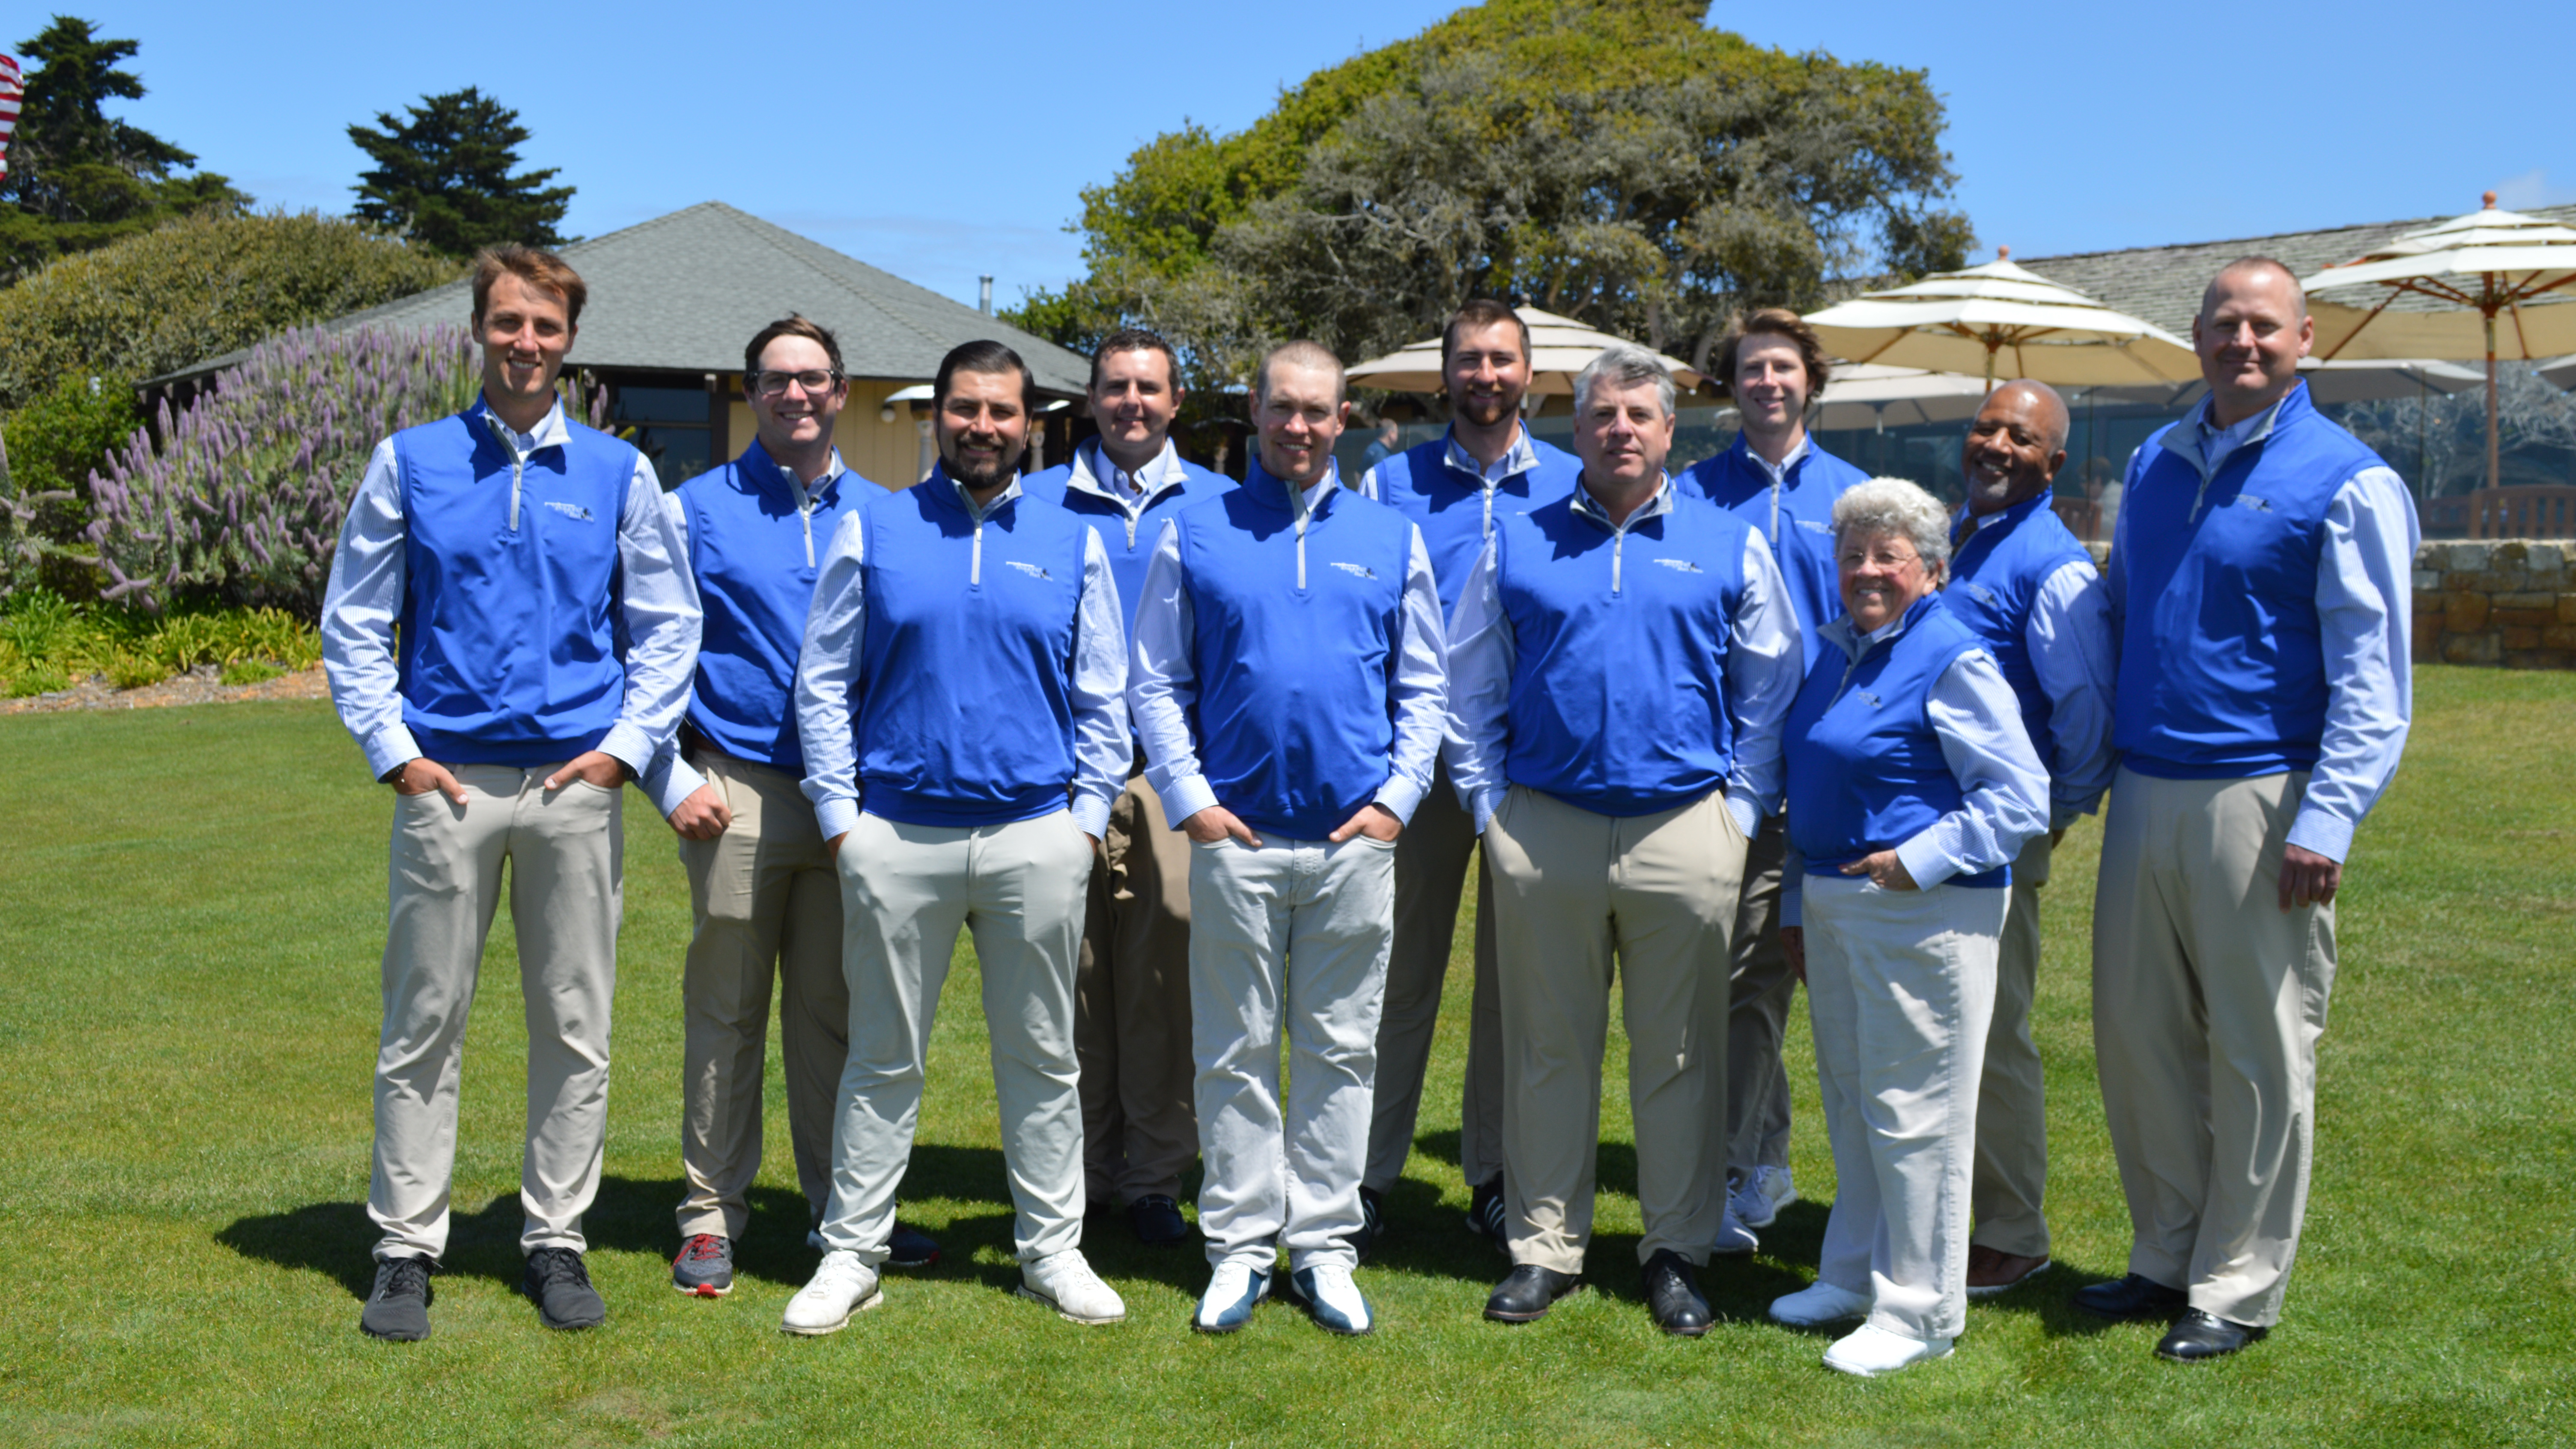 Bayonet Black Horse staff is prepared for third PGA of America Championship since 2012